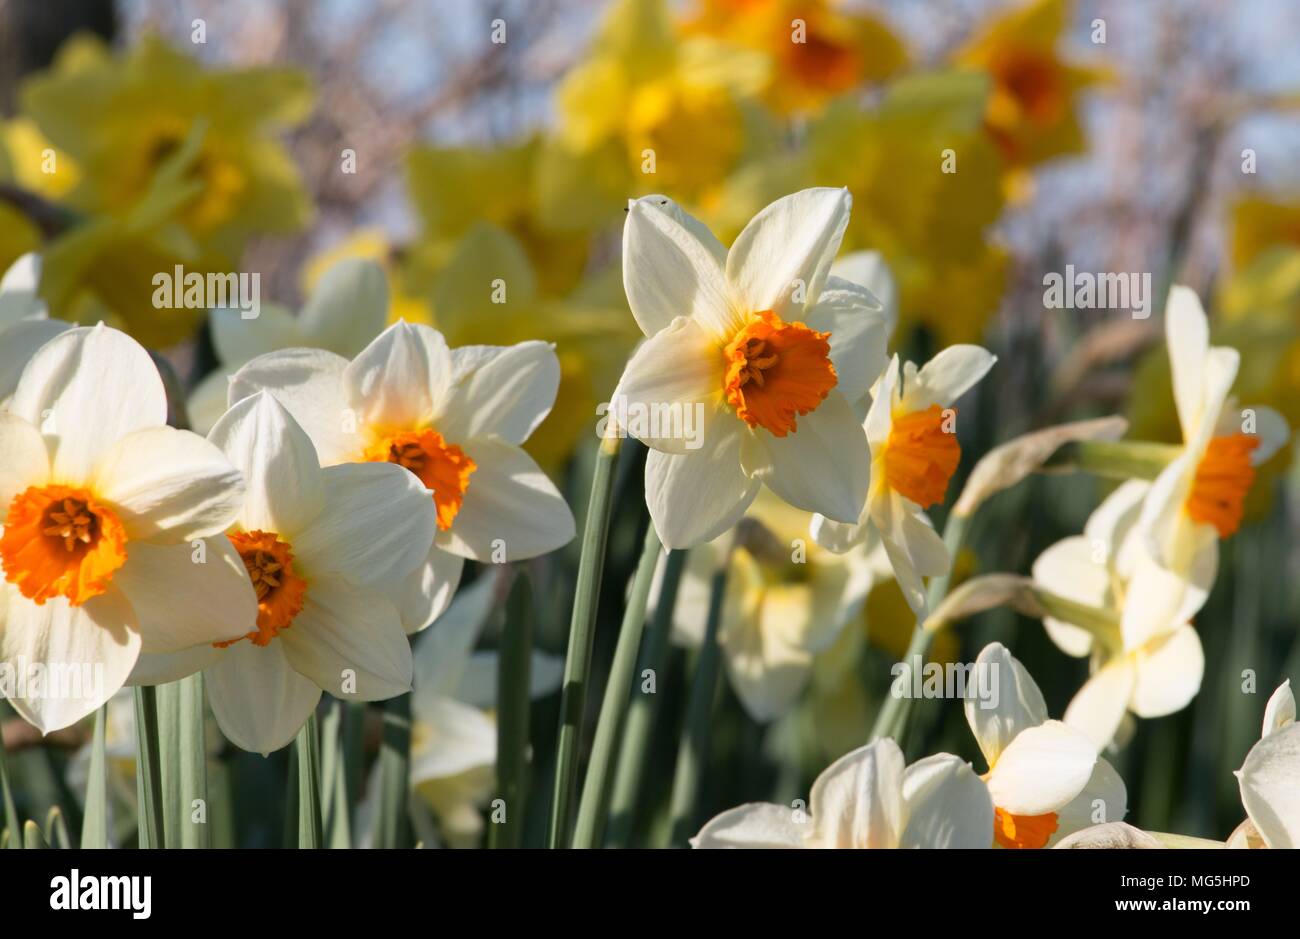 Yellow daffodils, Narcissus, flowering in the Shropshire spring sunshine Stock Photo